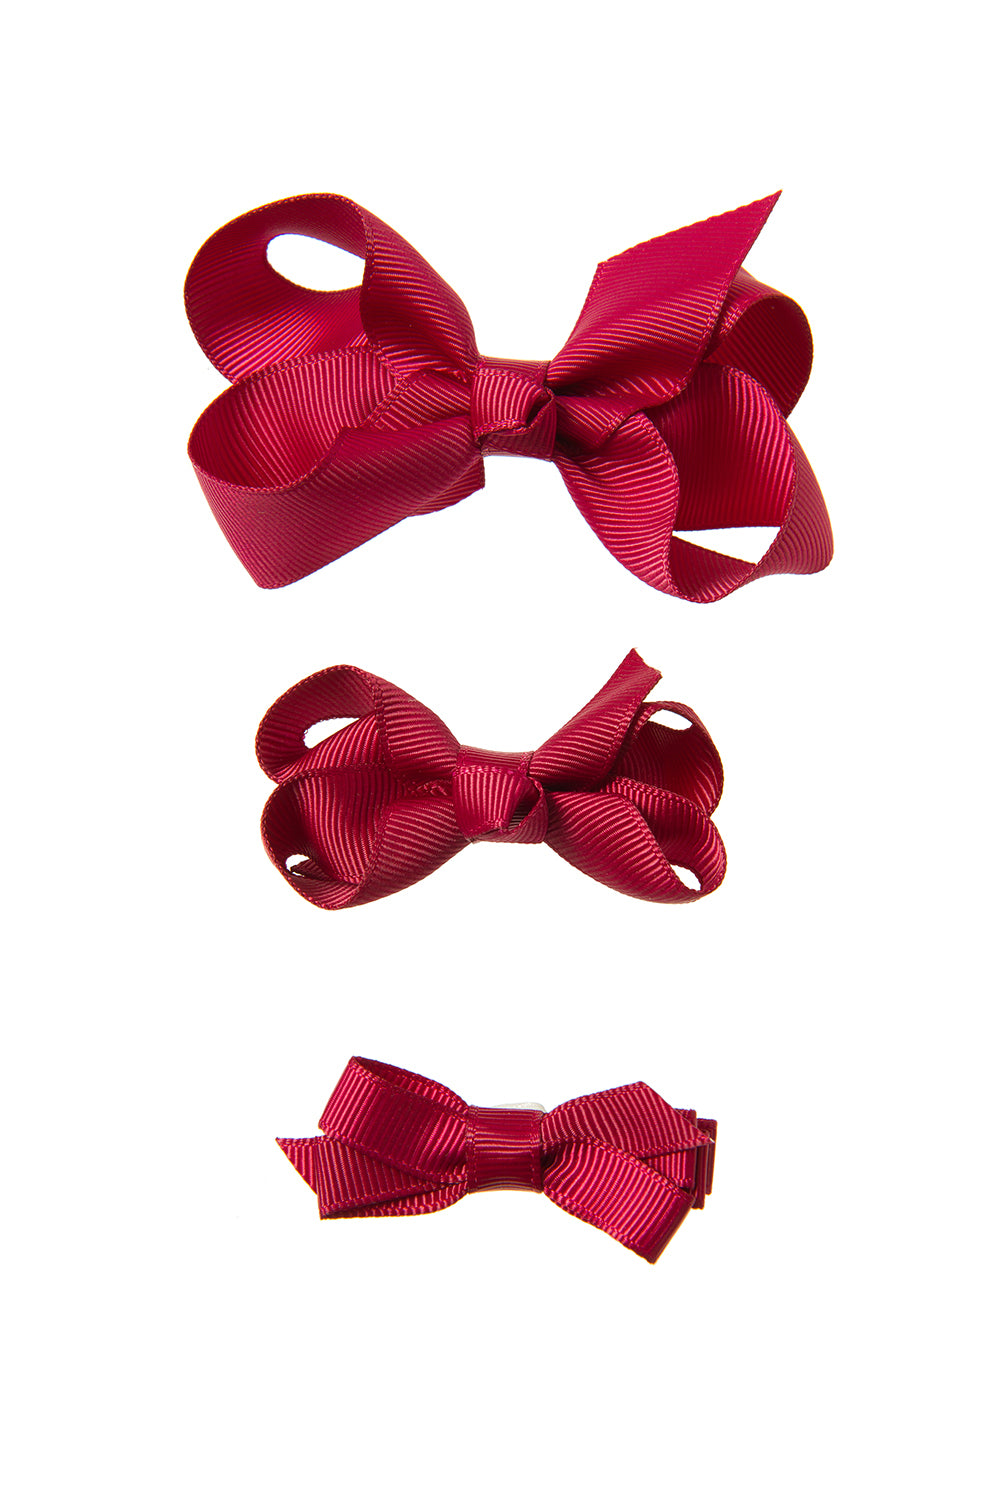 Rose Red Hair bow clips